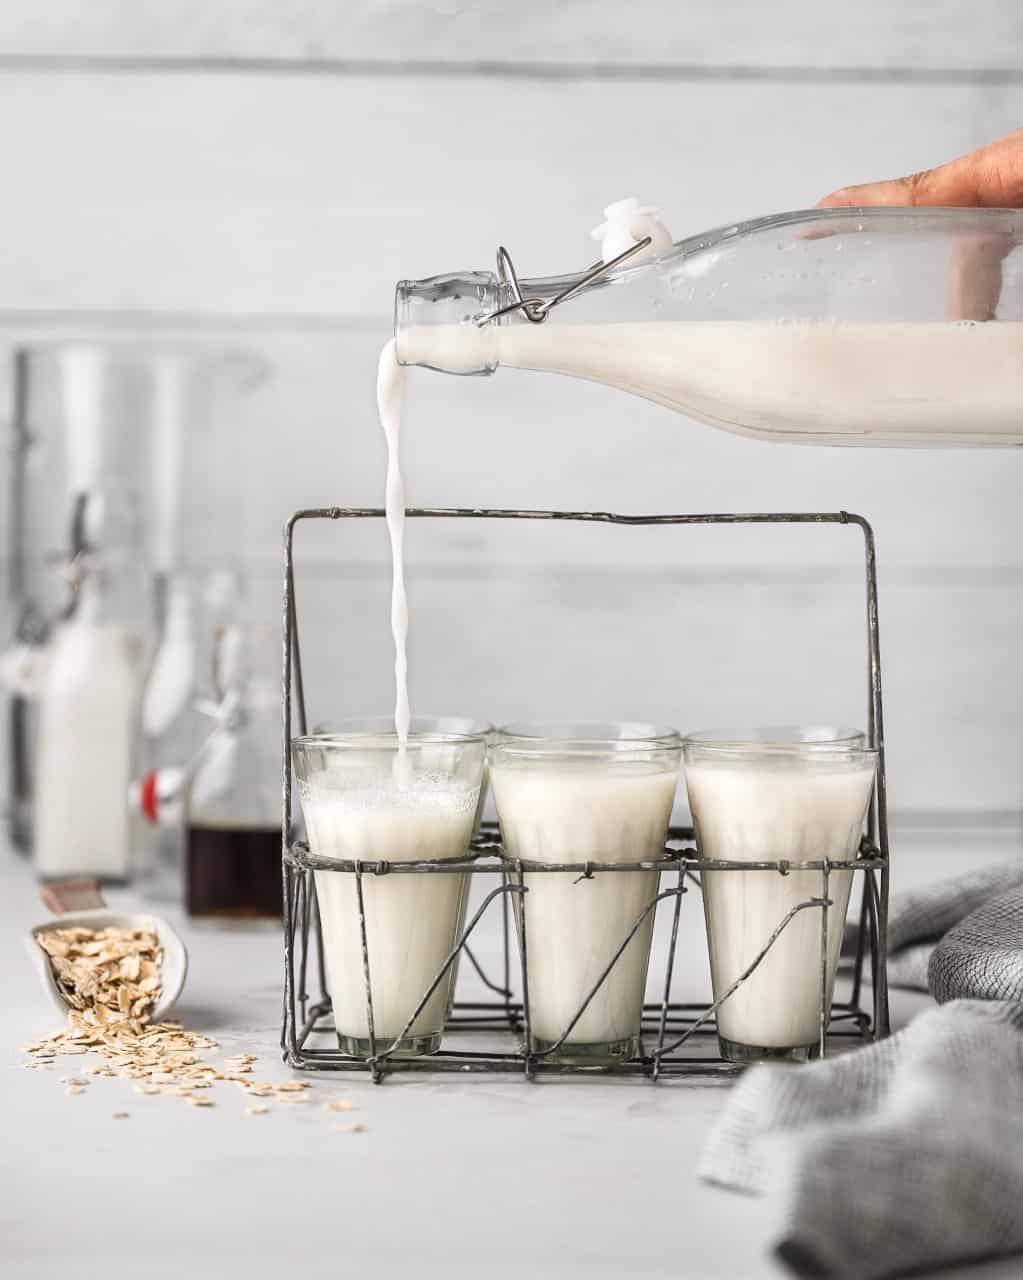 oat milk being poured into a glass